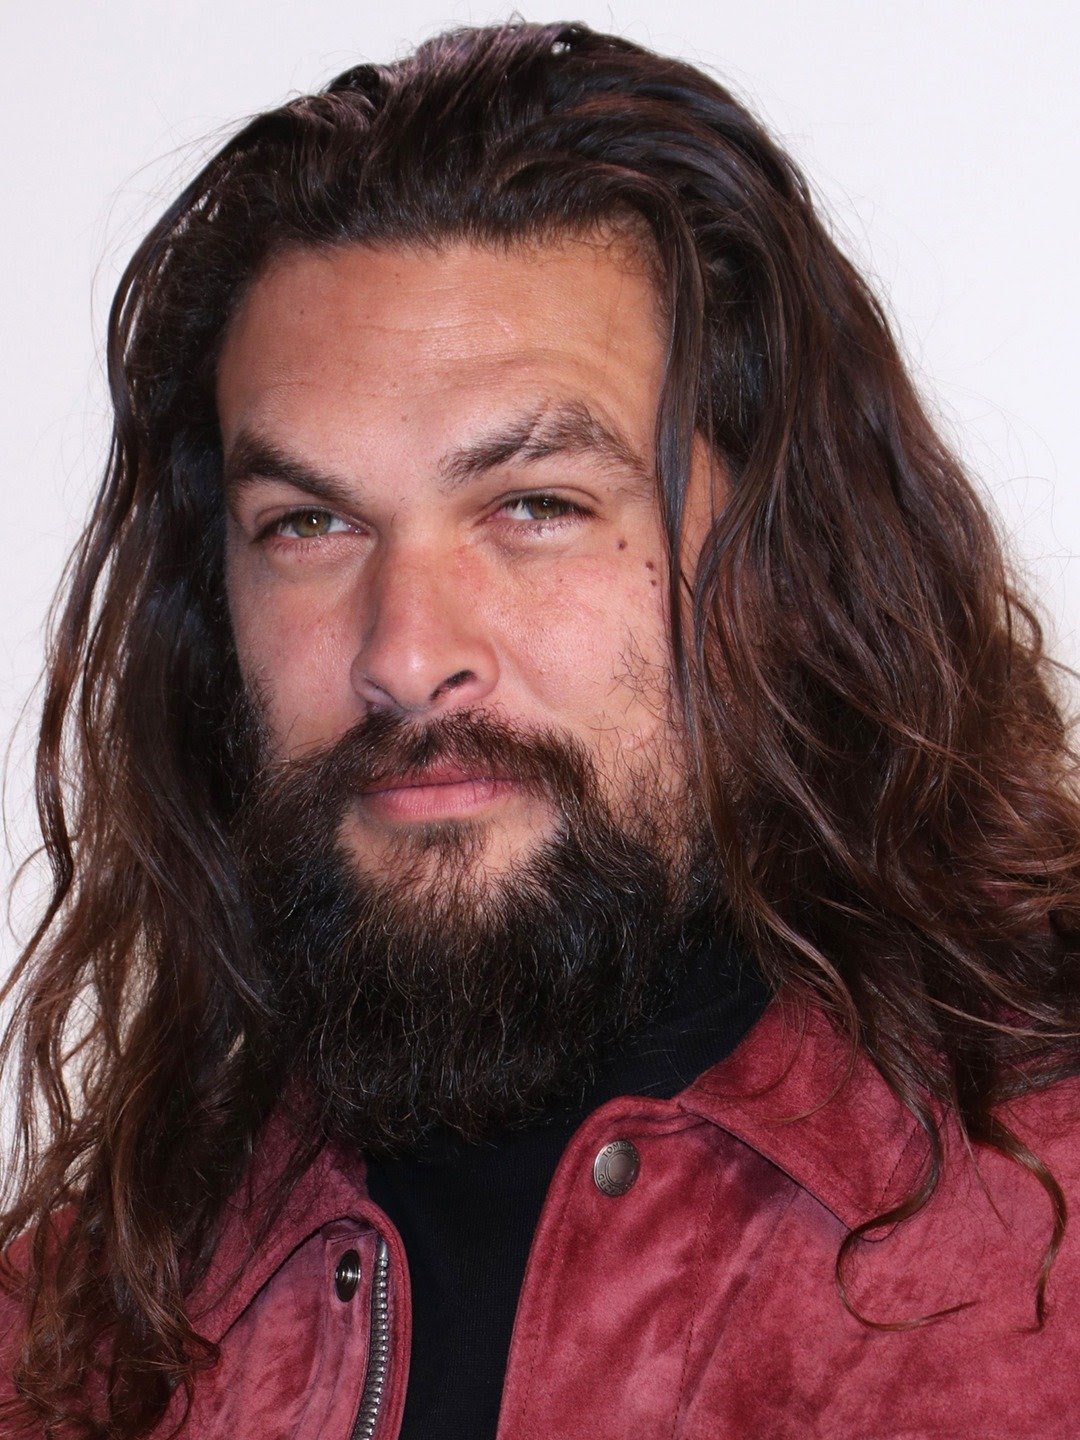 “I went to a con and caught an elevator one day to get to a panel on another floor. I was in a wheelchair. When the elevator opened its doors, there was Jason Momoa! He was a sweetheart and insisted on pulling me in. He also insisted on pushing me out on my floor, even though he was heading for an entirely different floor, and took a picture with me. Great guy, very sweet and funny, and BTW, HUGE.”